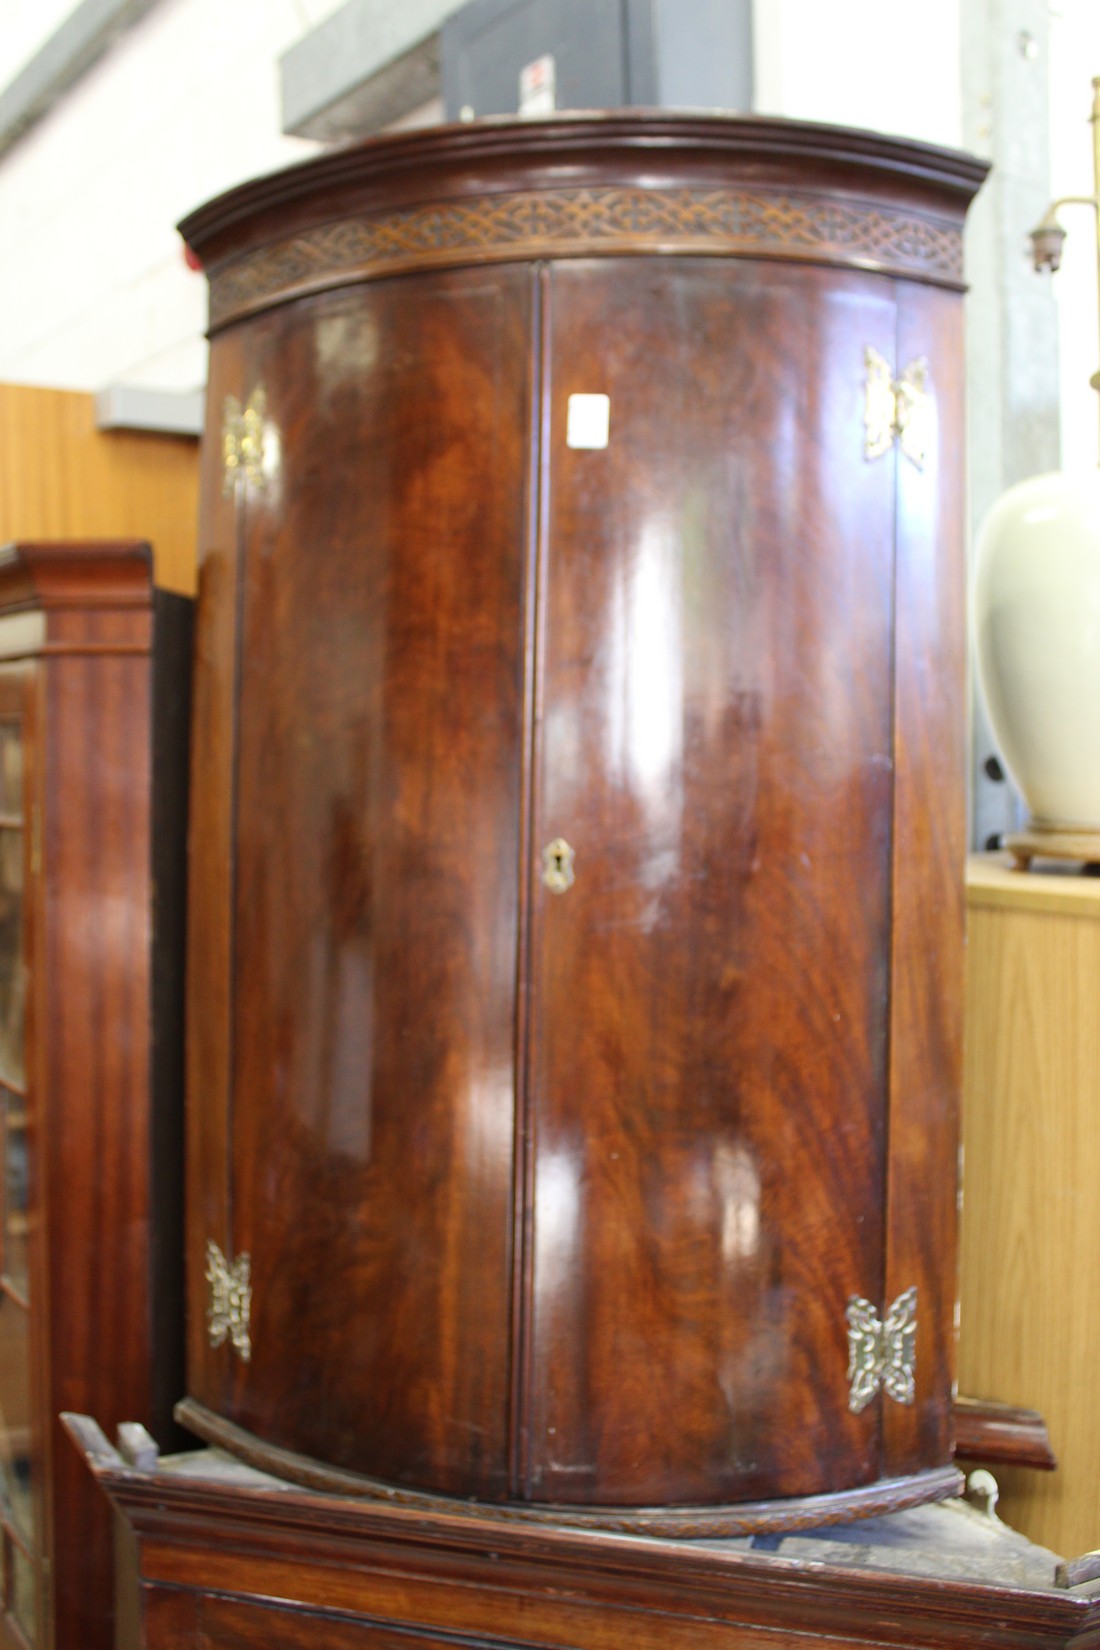 A 19th century mahogany bowfront hanging corner cupboard.